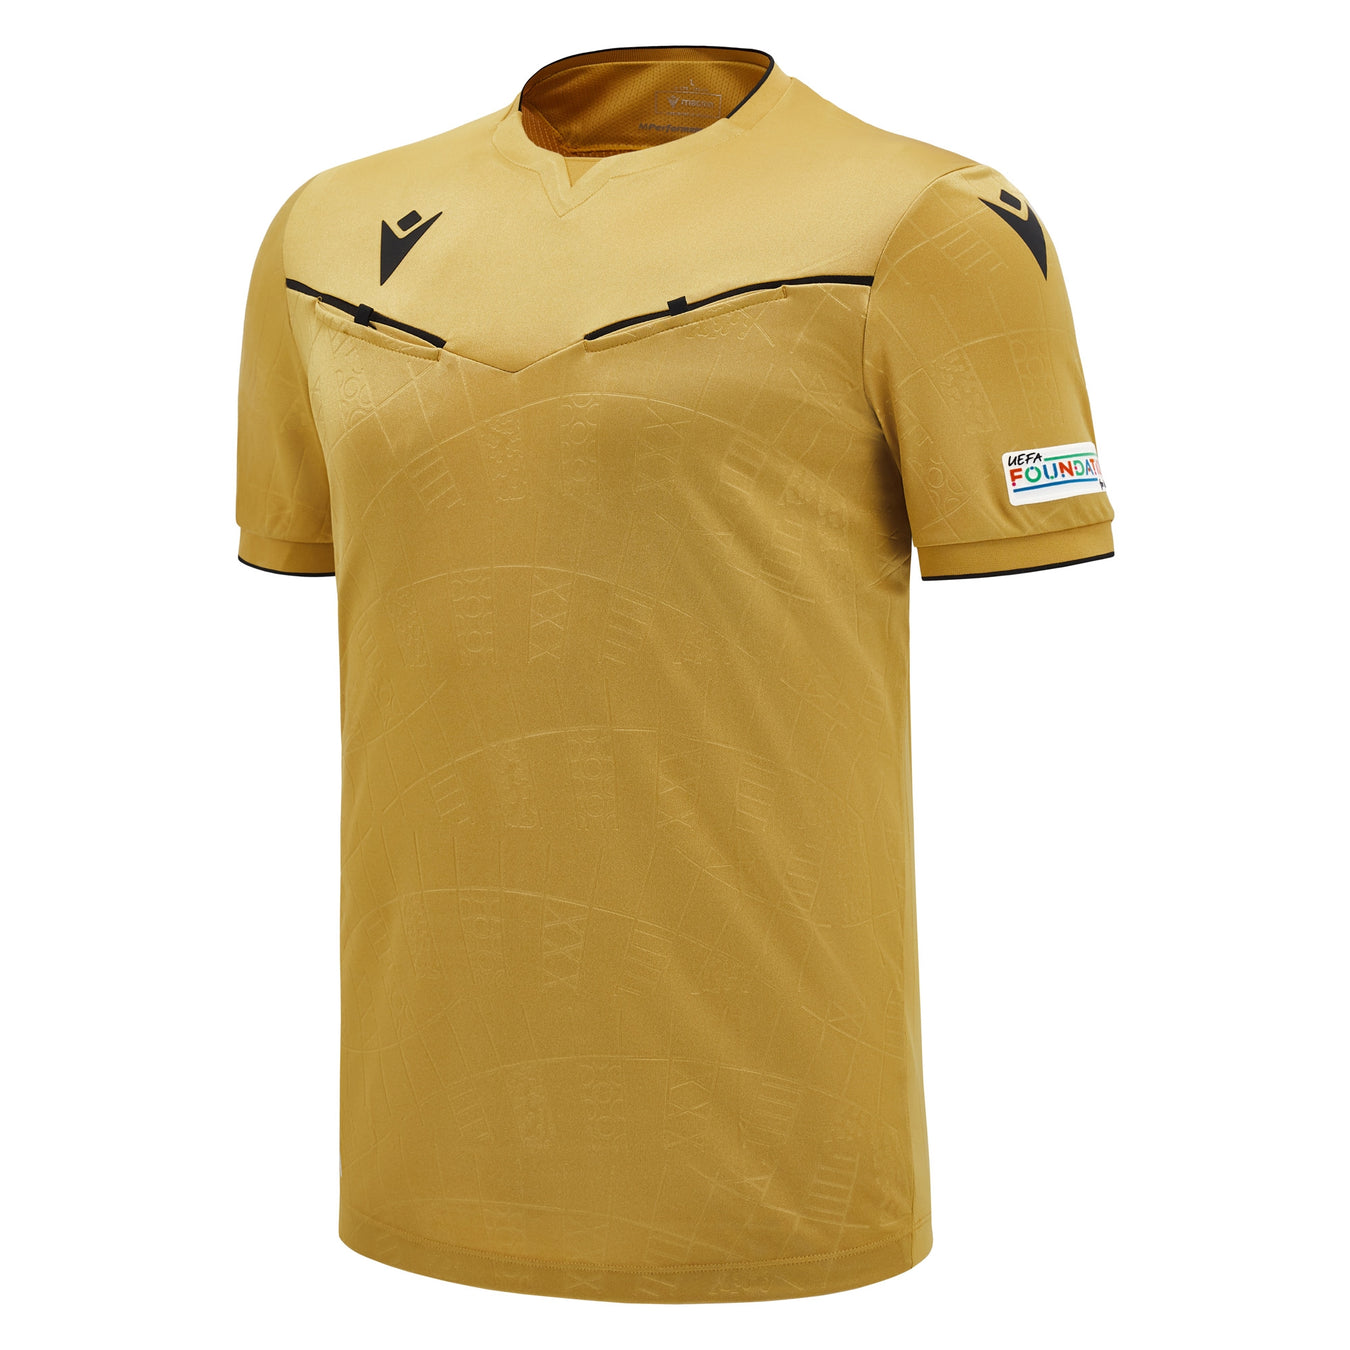 Official UEFA referee clothing for the 2024 European Championship